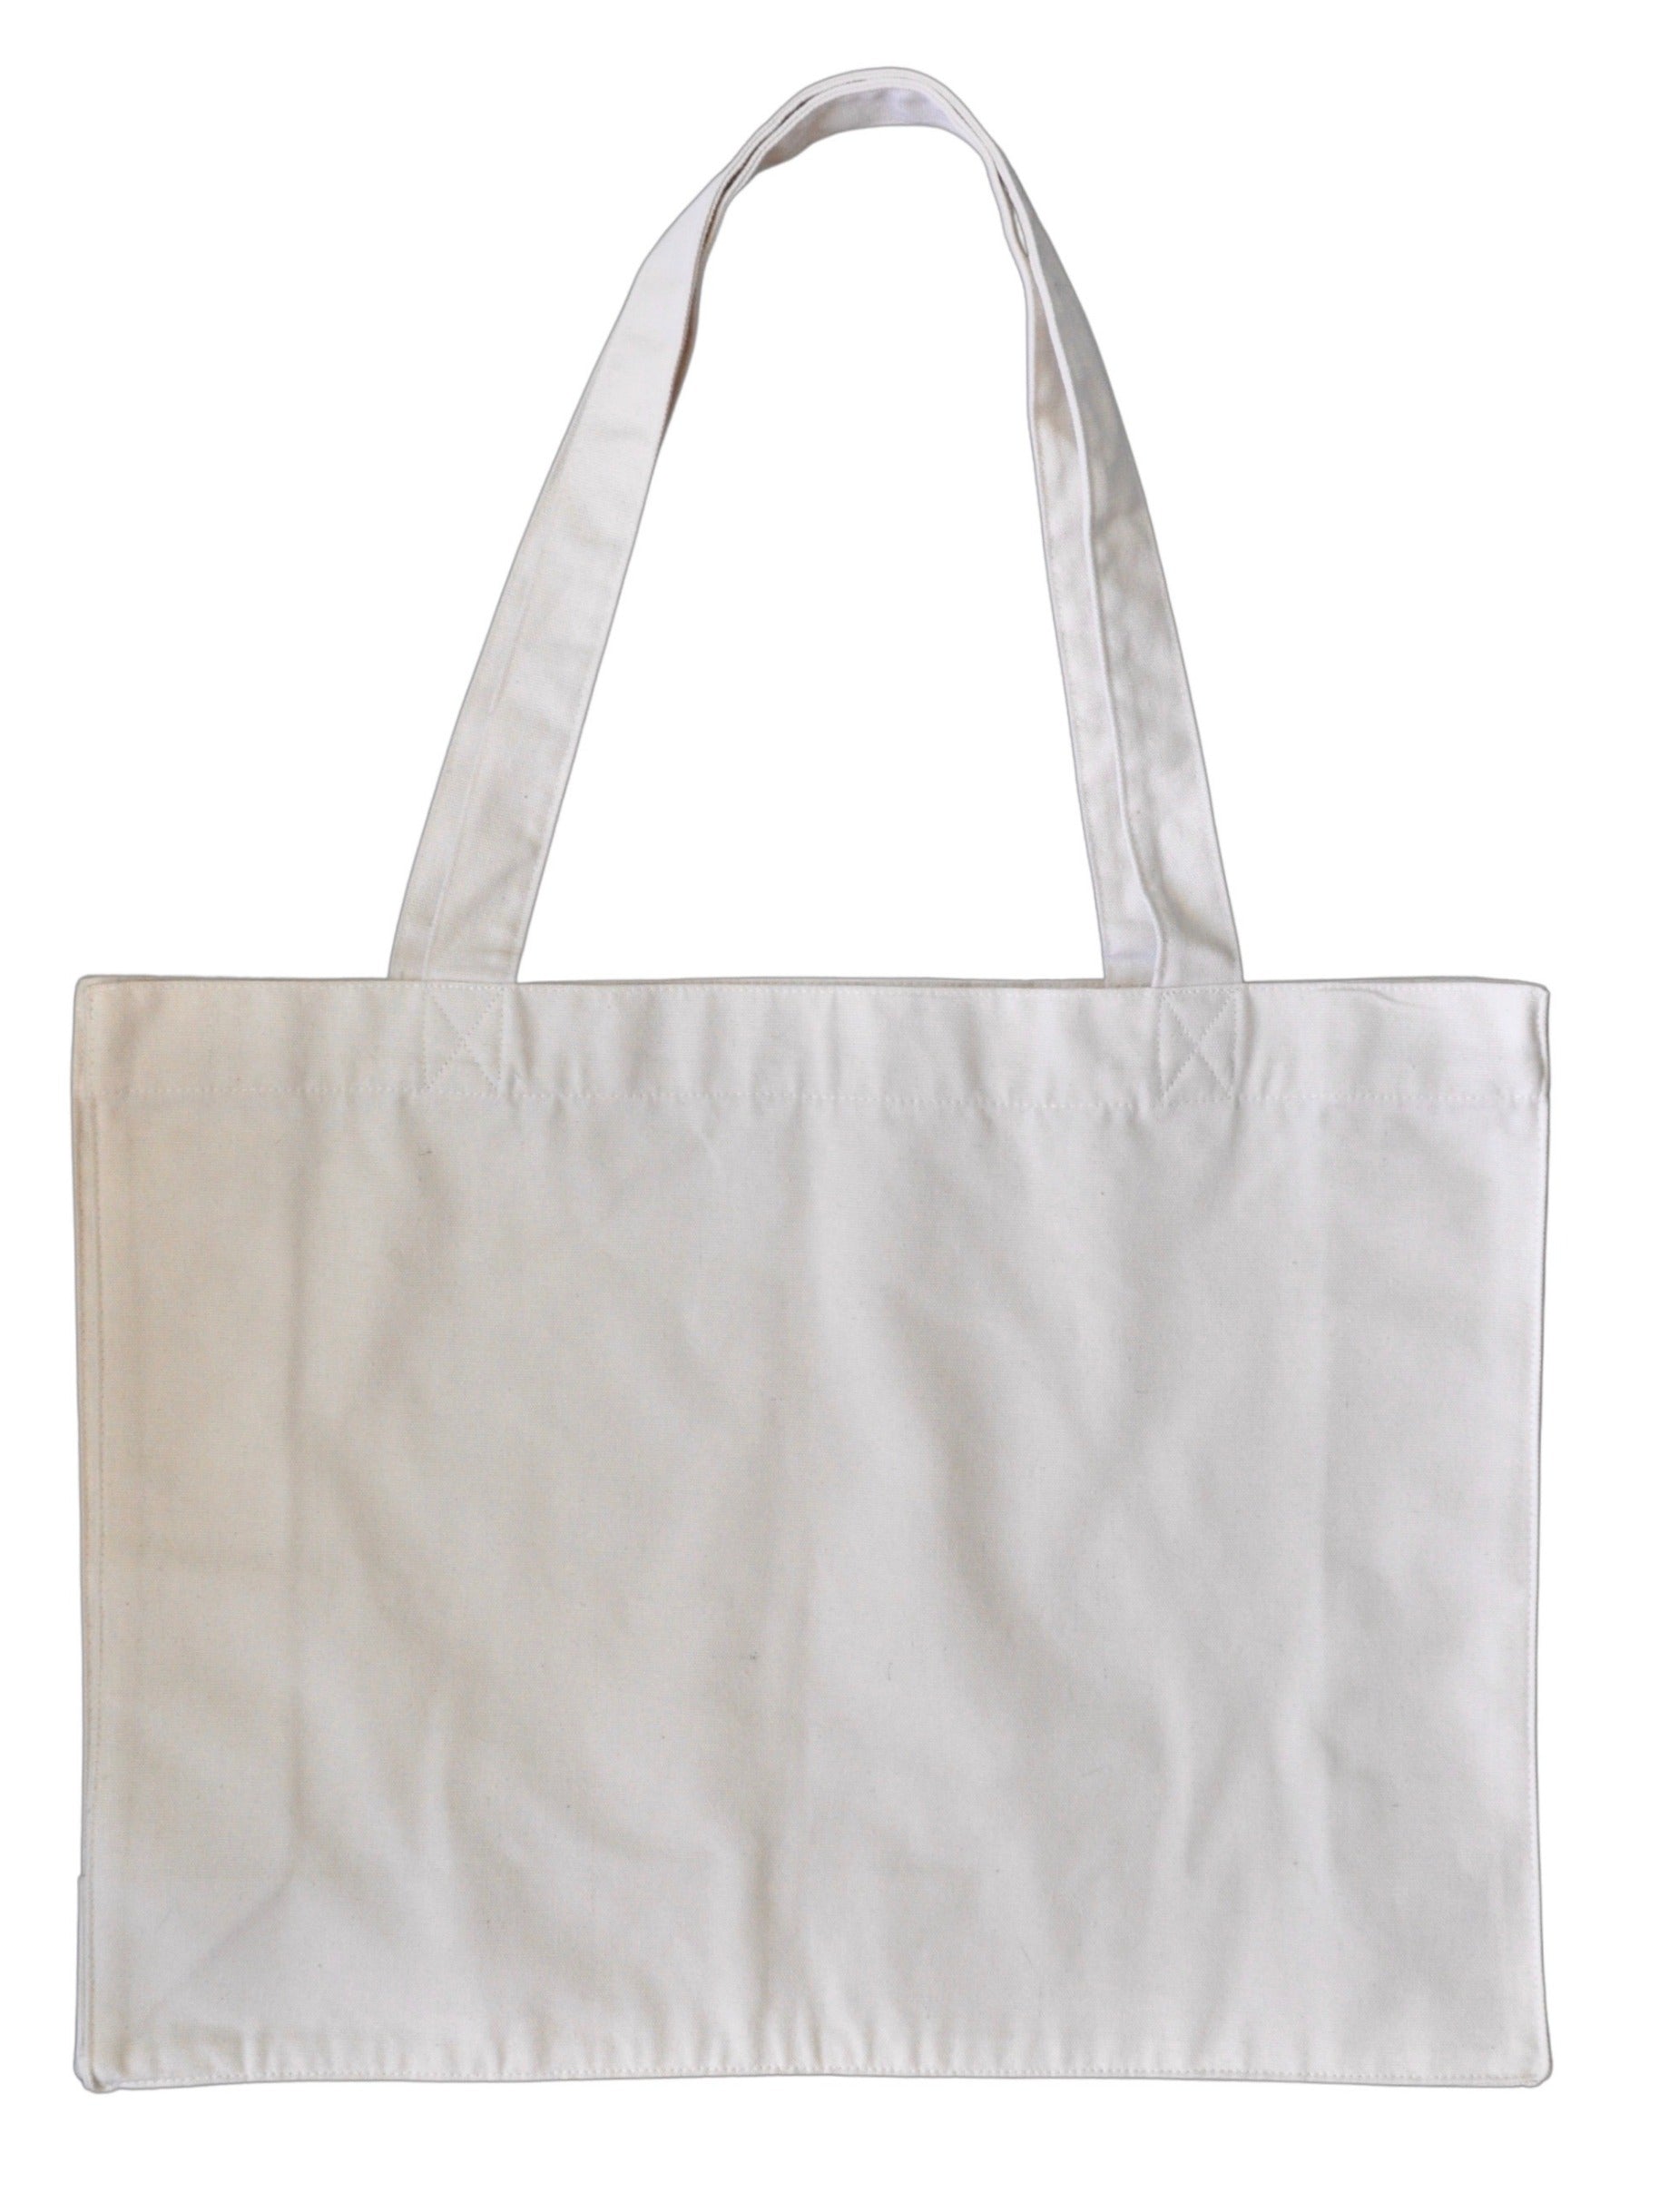 BY11 Recycled Cotton Canvas Tote Bag - Natural